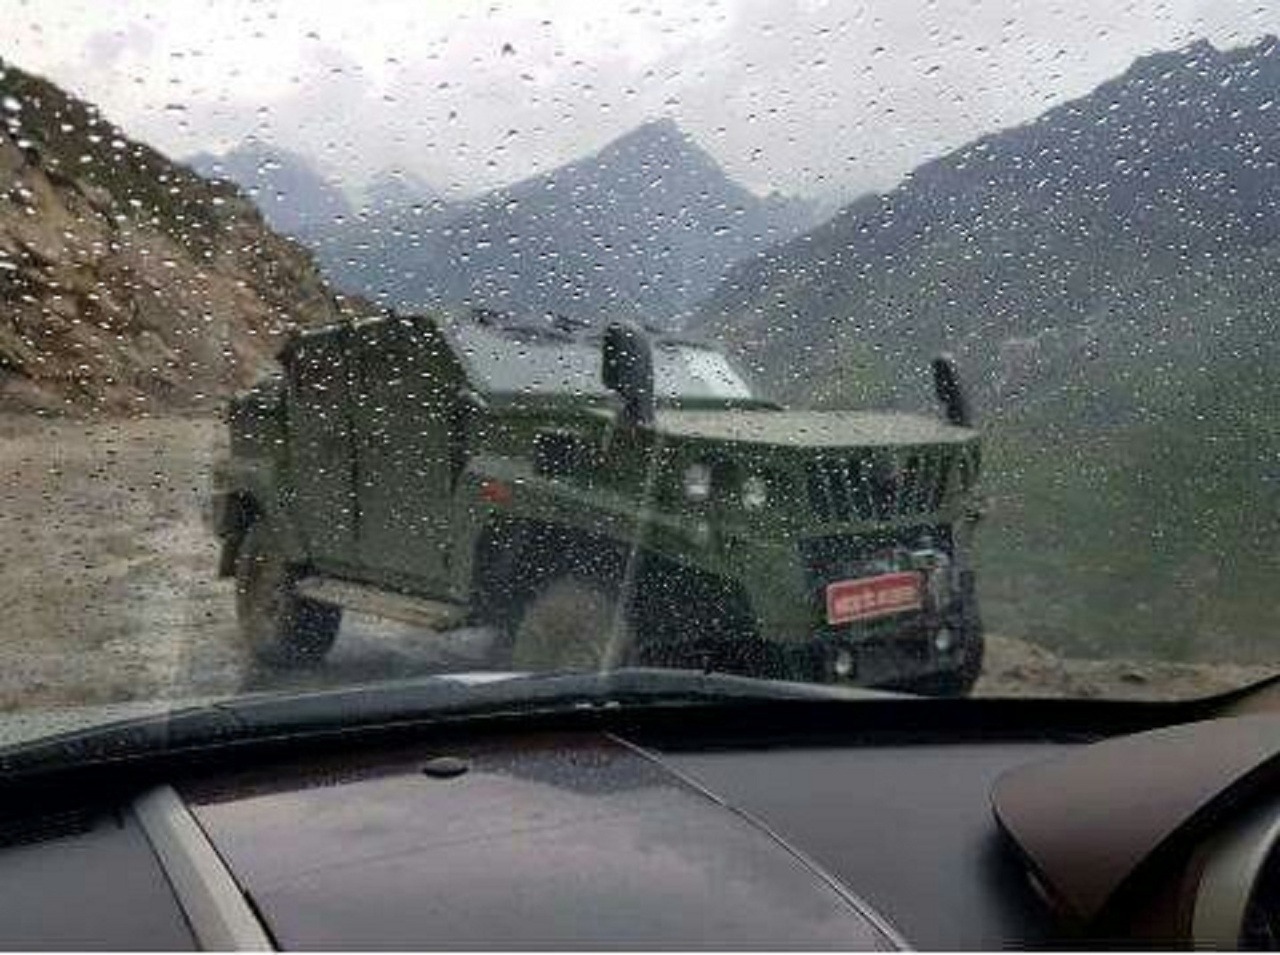 Mahindra LSV during high altitude trails in Ladakh